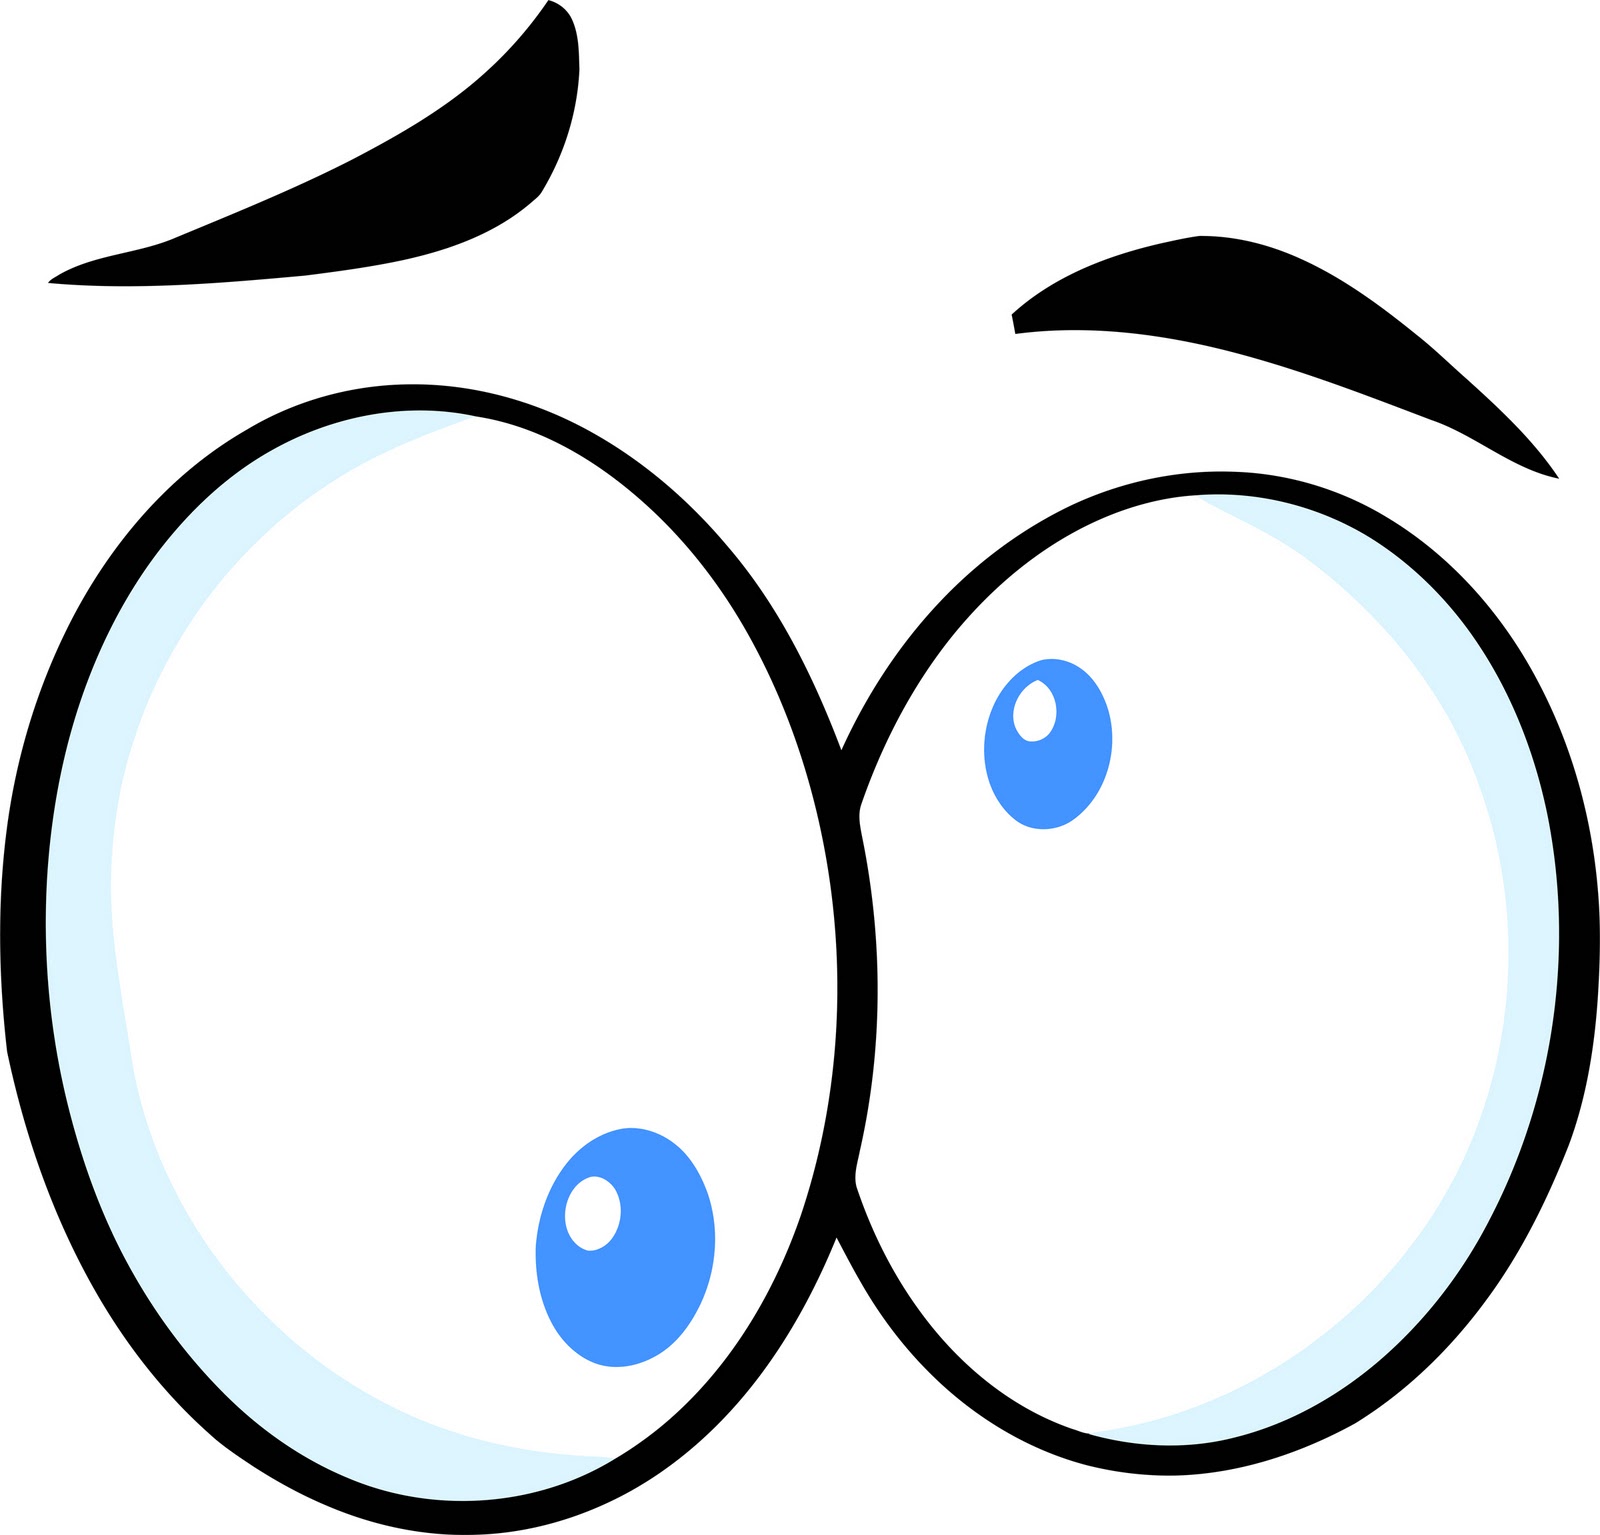 Moving Eyes Clipart